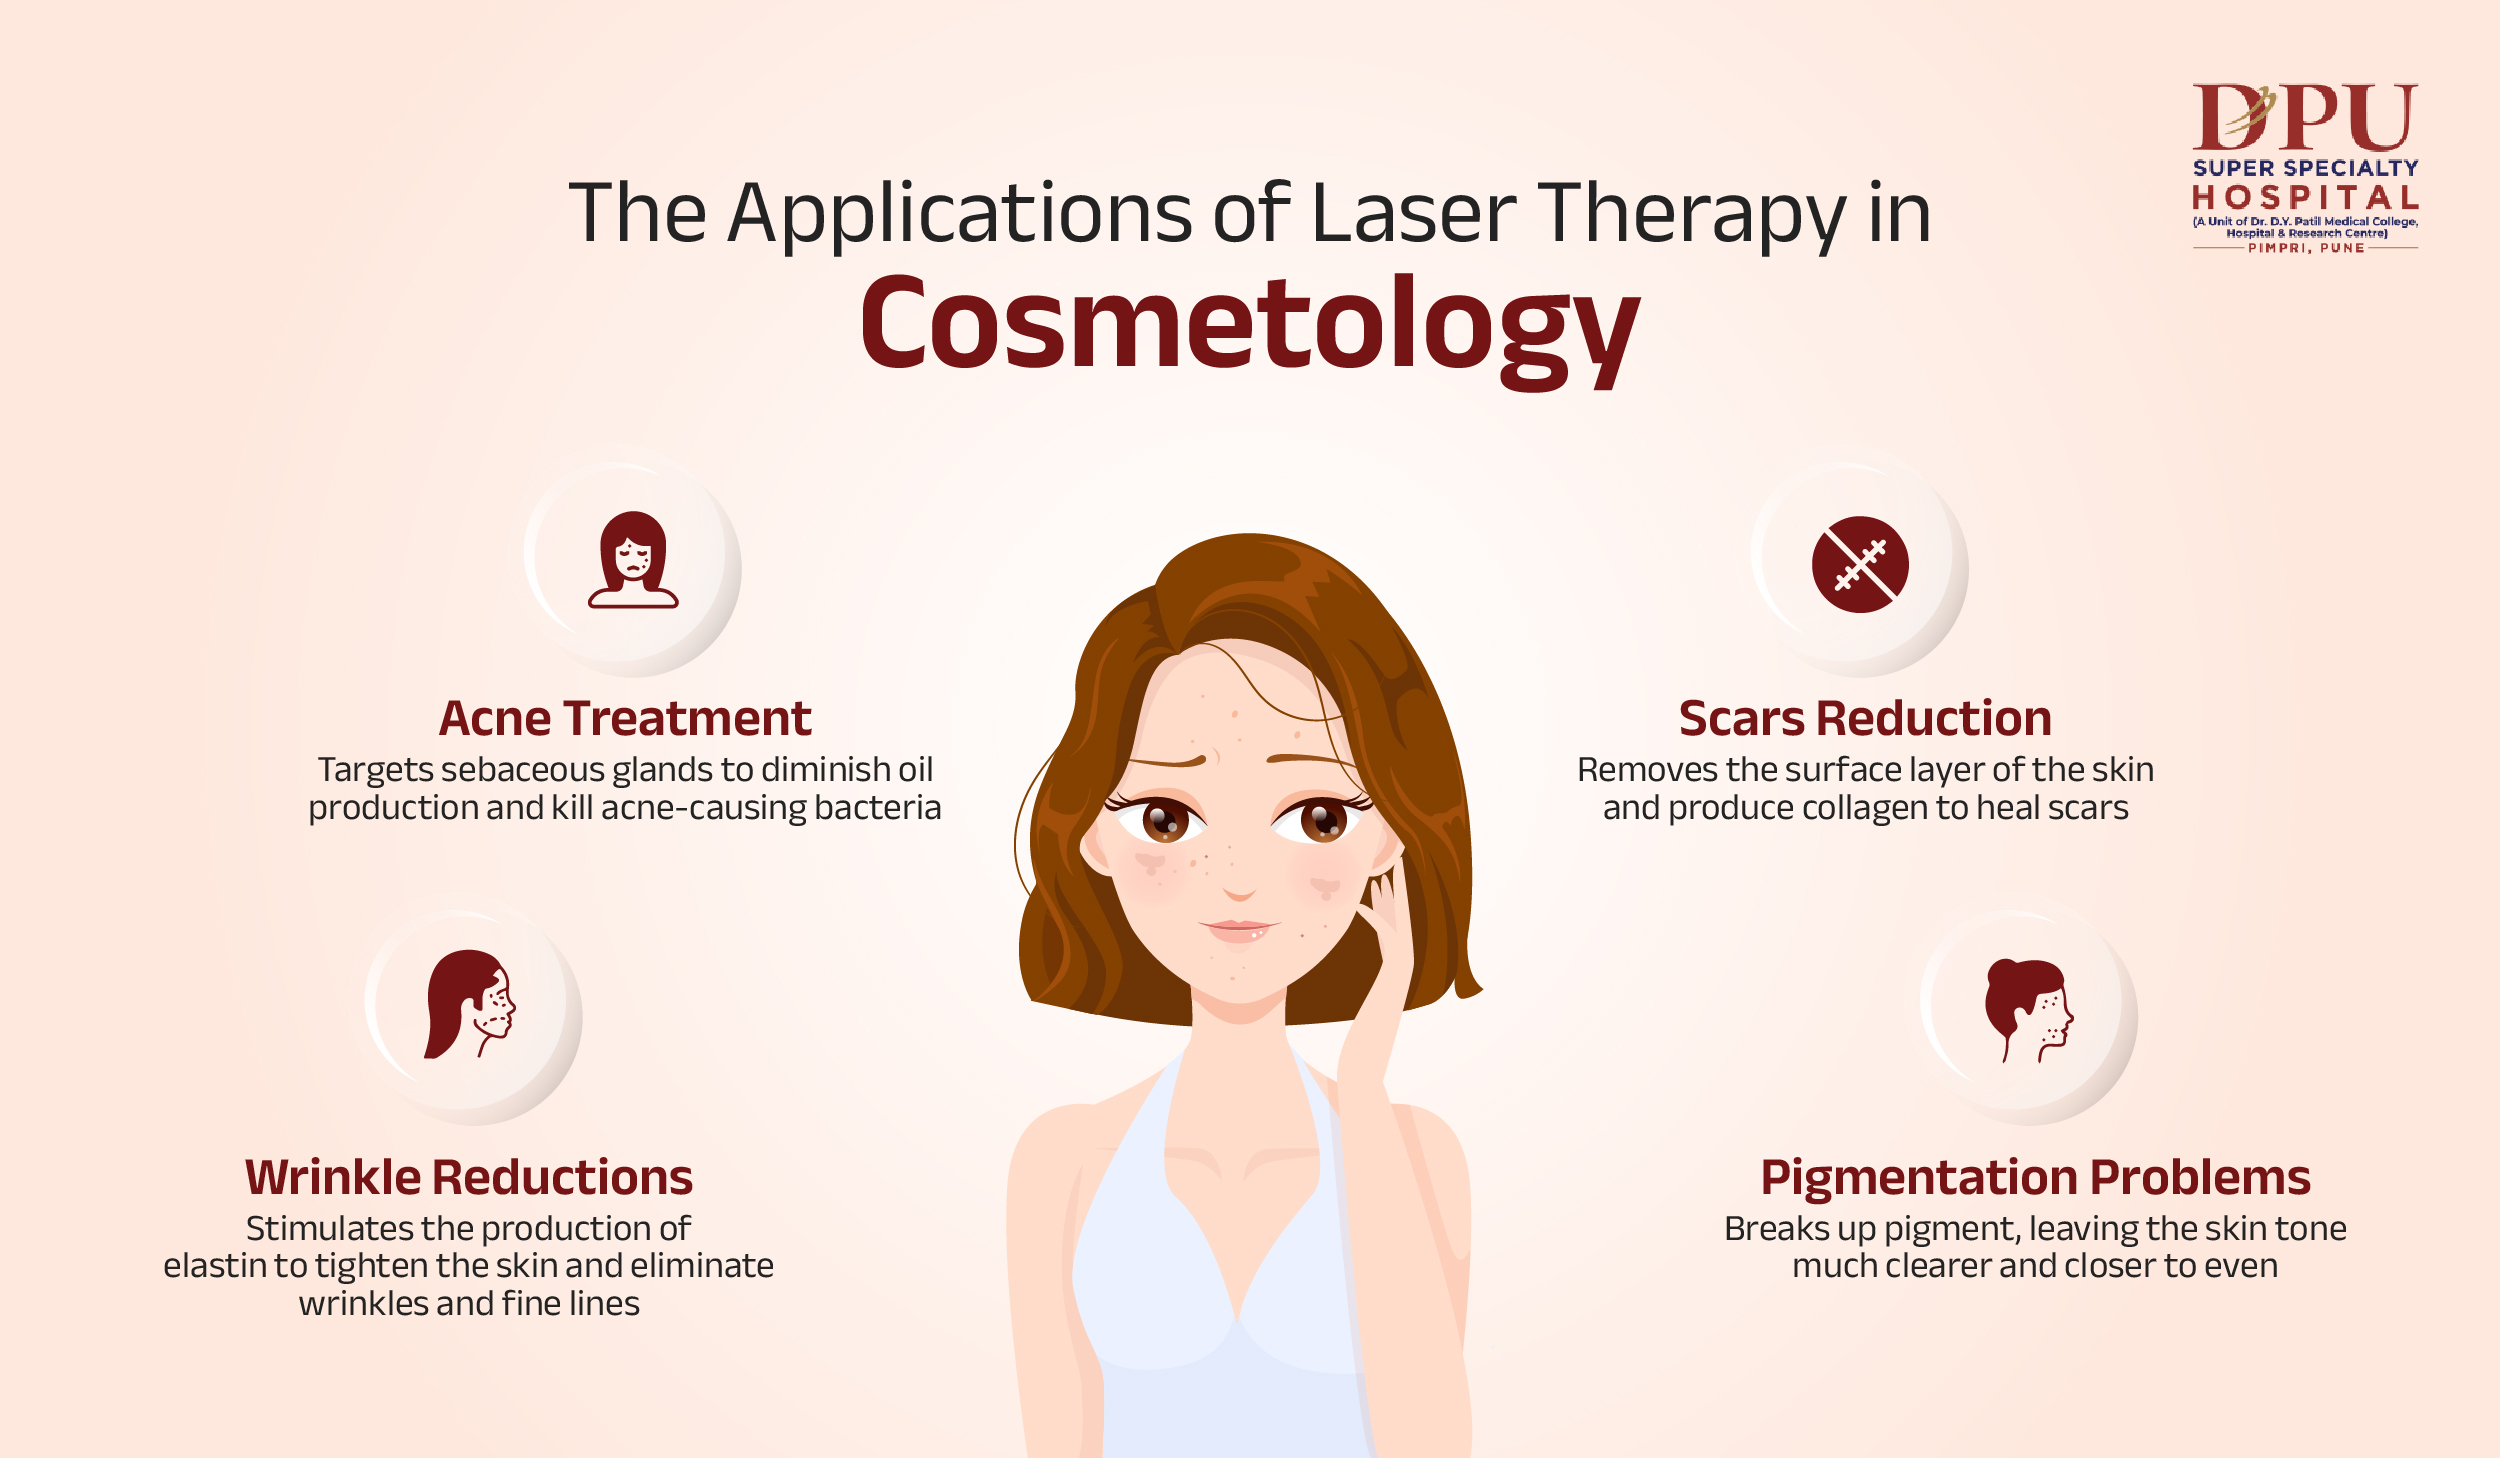 Laser therapy in Cosmetology